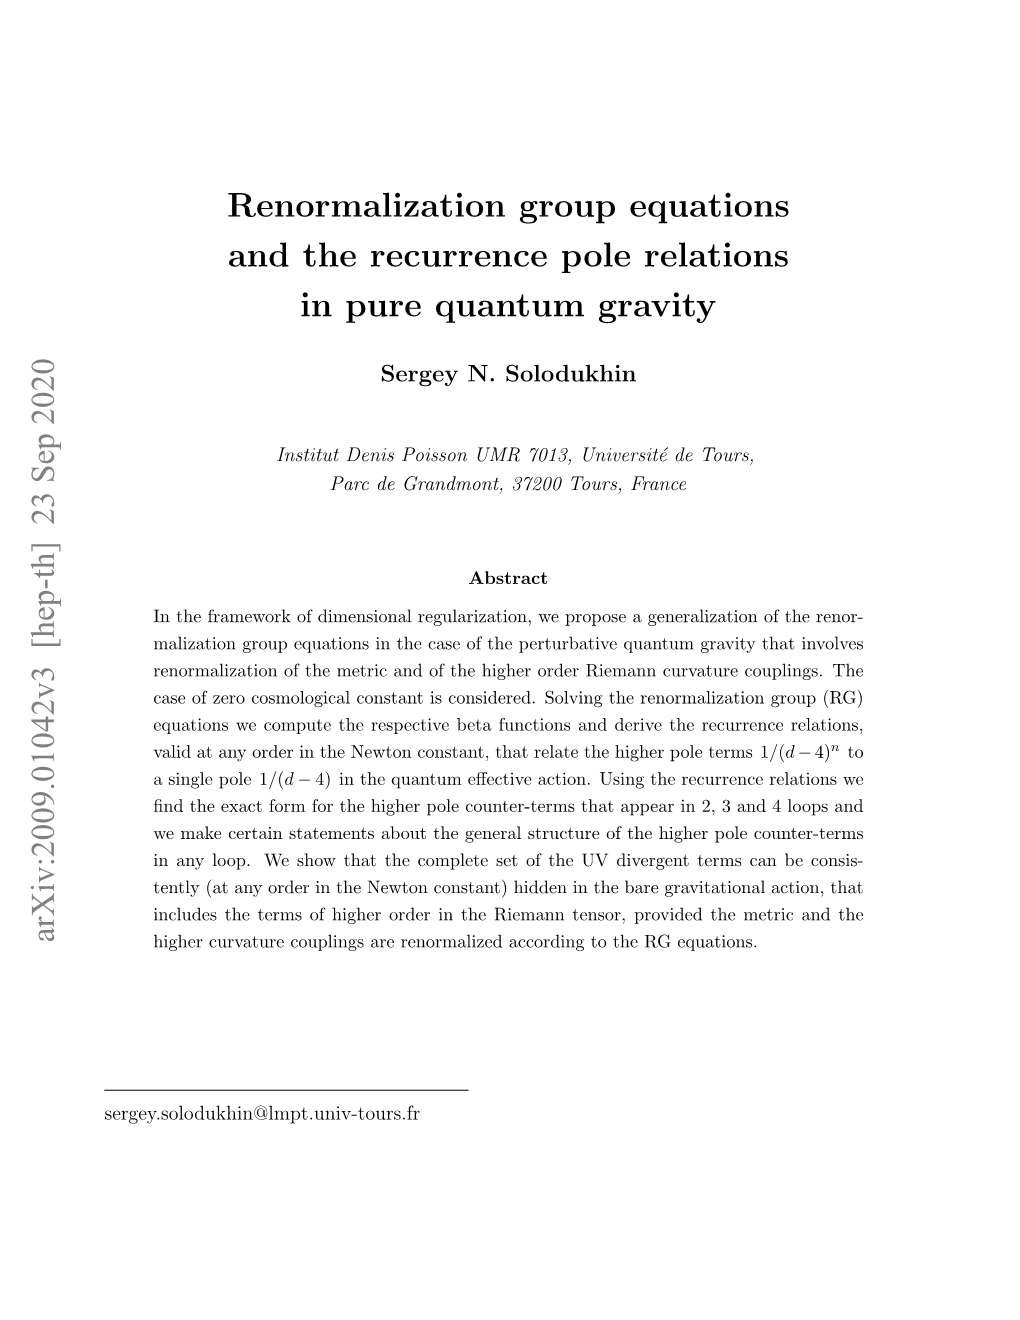 Renormalization Group Equations and the Recurrence Pole Relations in Pure Quantum Gravity